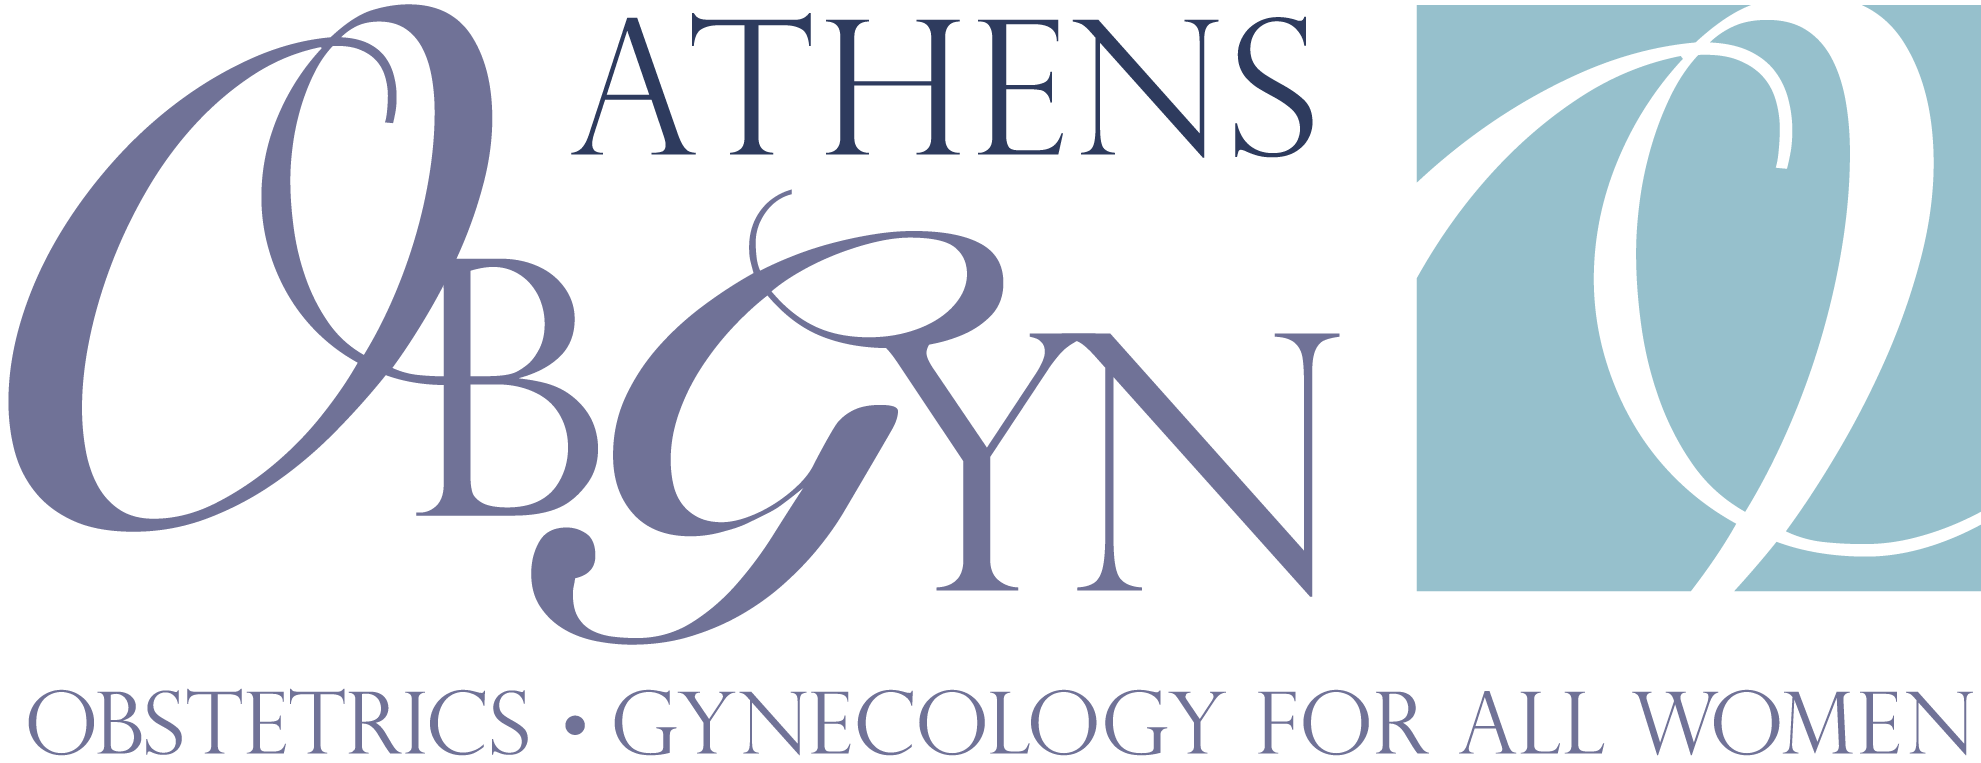 About Athens ObGyn – Experience, Innovation and Excellence ...